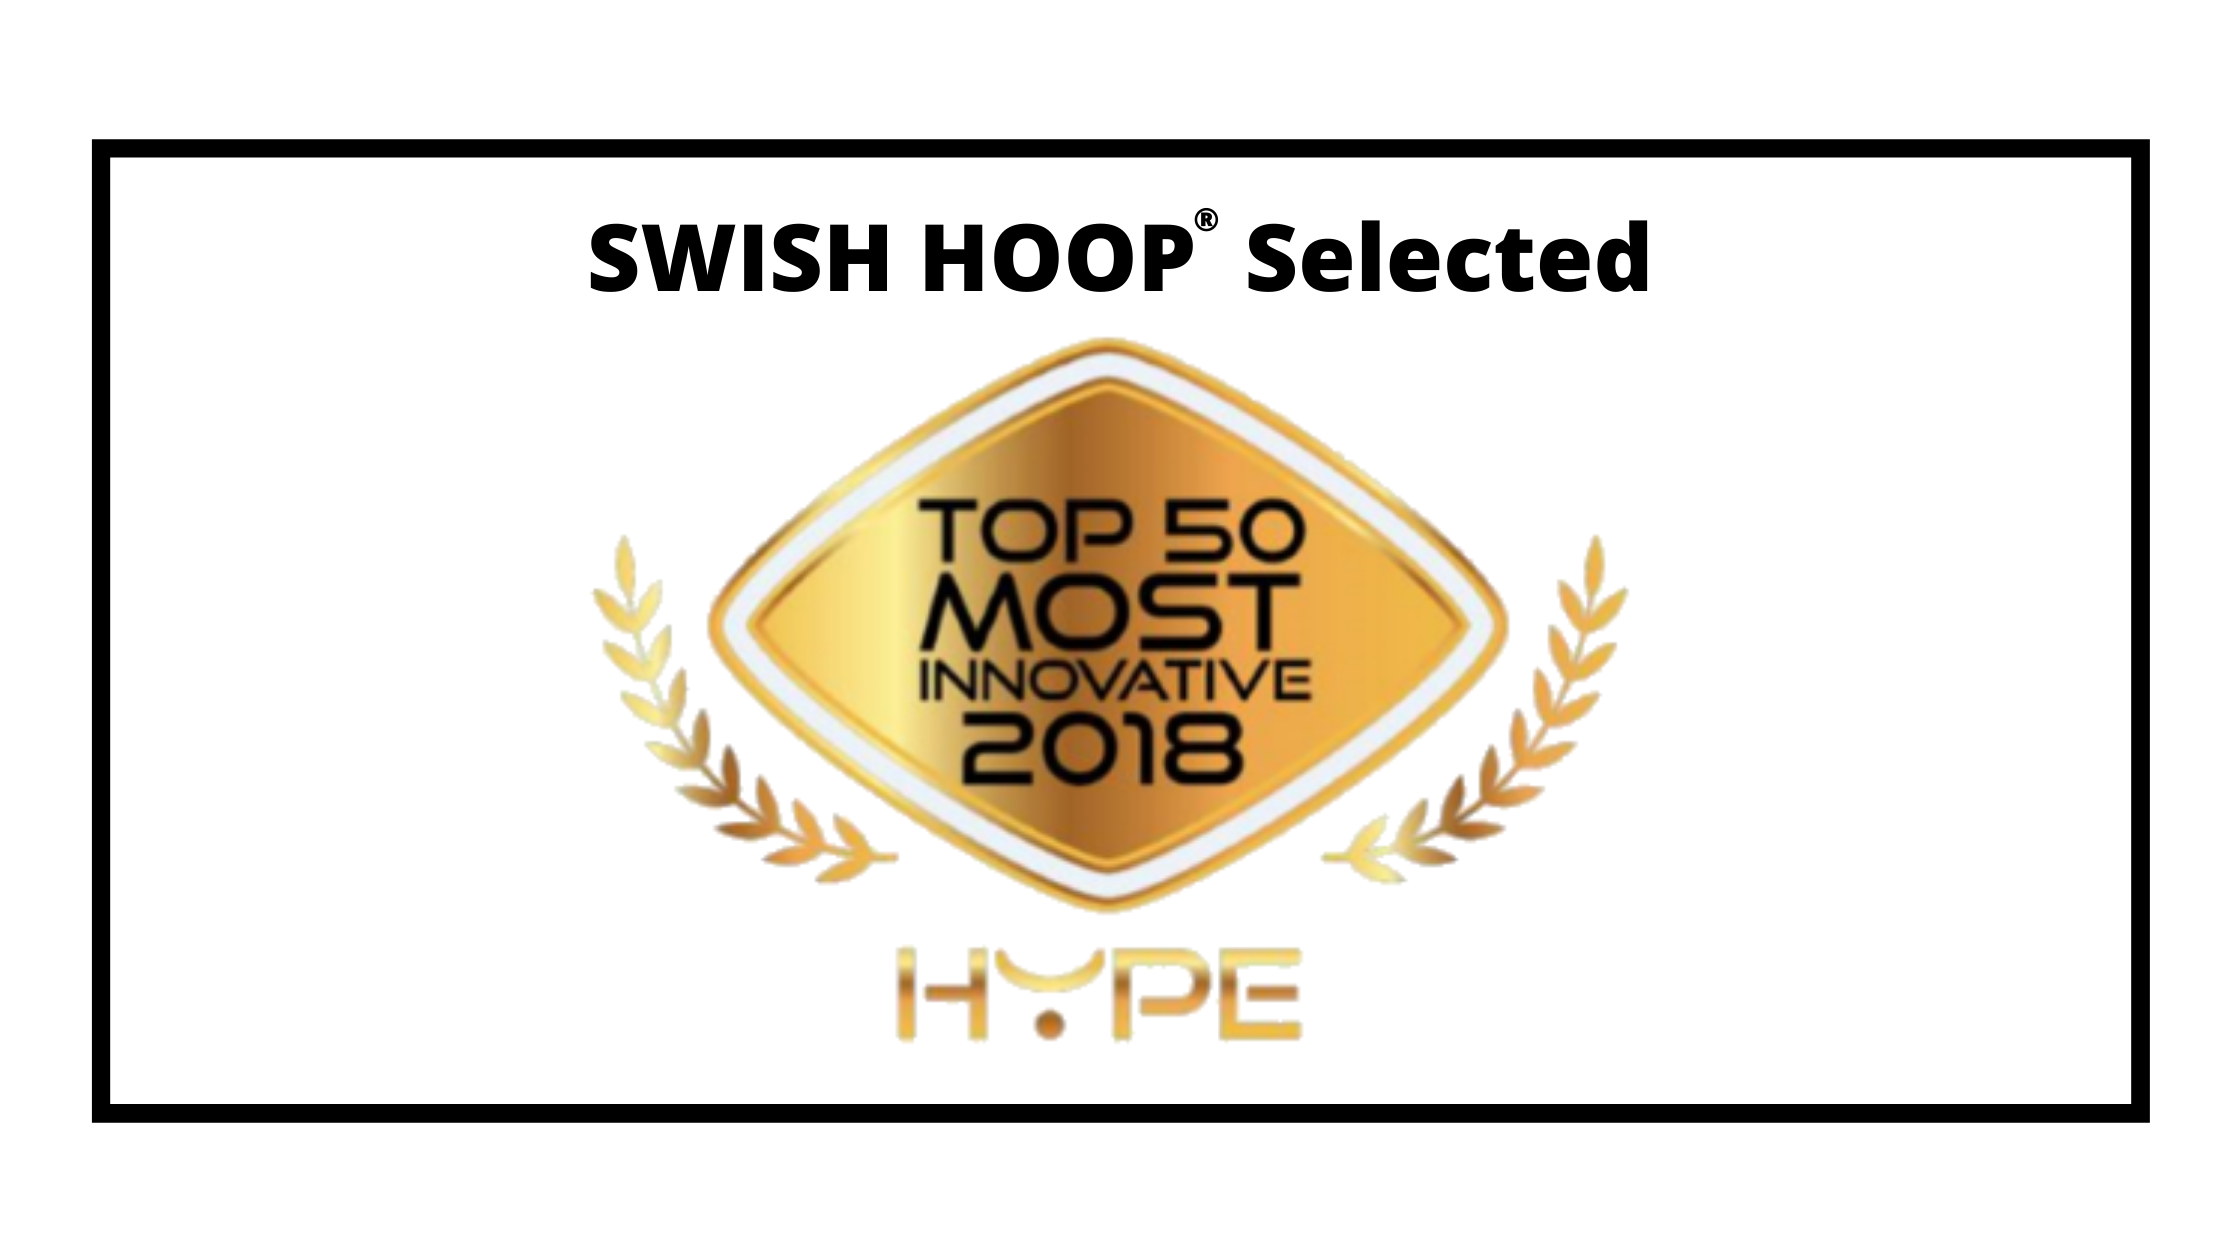 Advanced Basketball Technology Company, Swish Hoop, Selected as Worldwide Most Innovative TOP 50 Sports Technology Startup